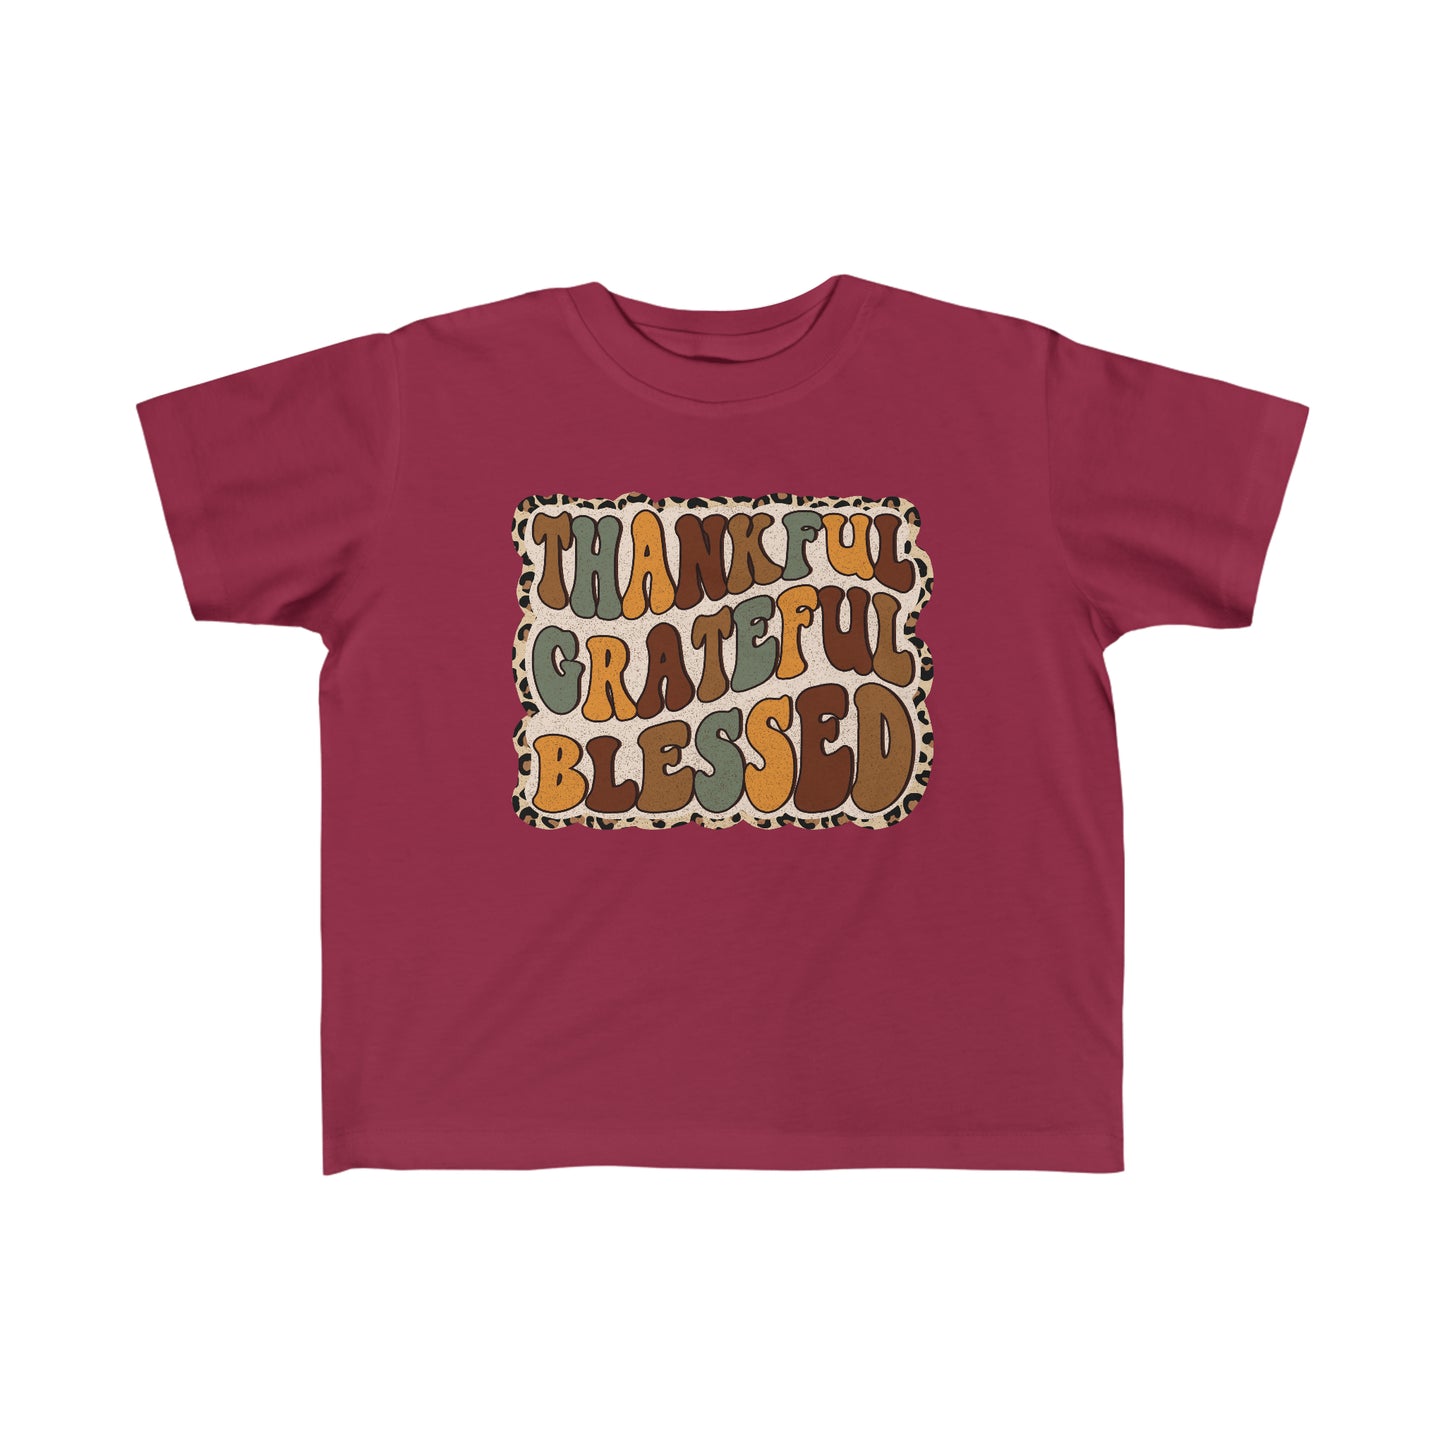 Thankful Grateful and Blessed Toddler's Fine Jersey Tee